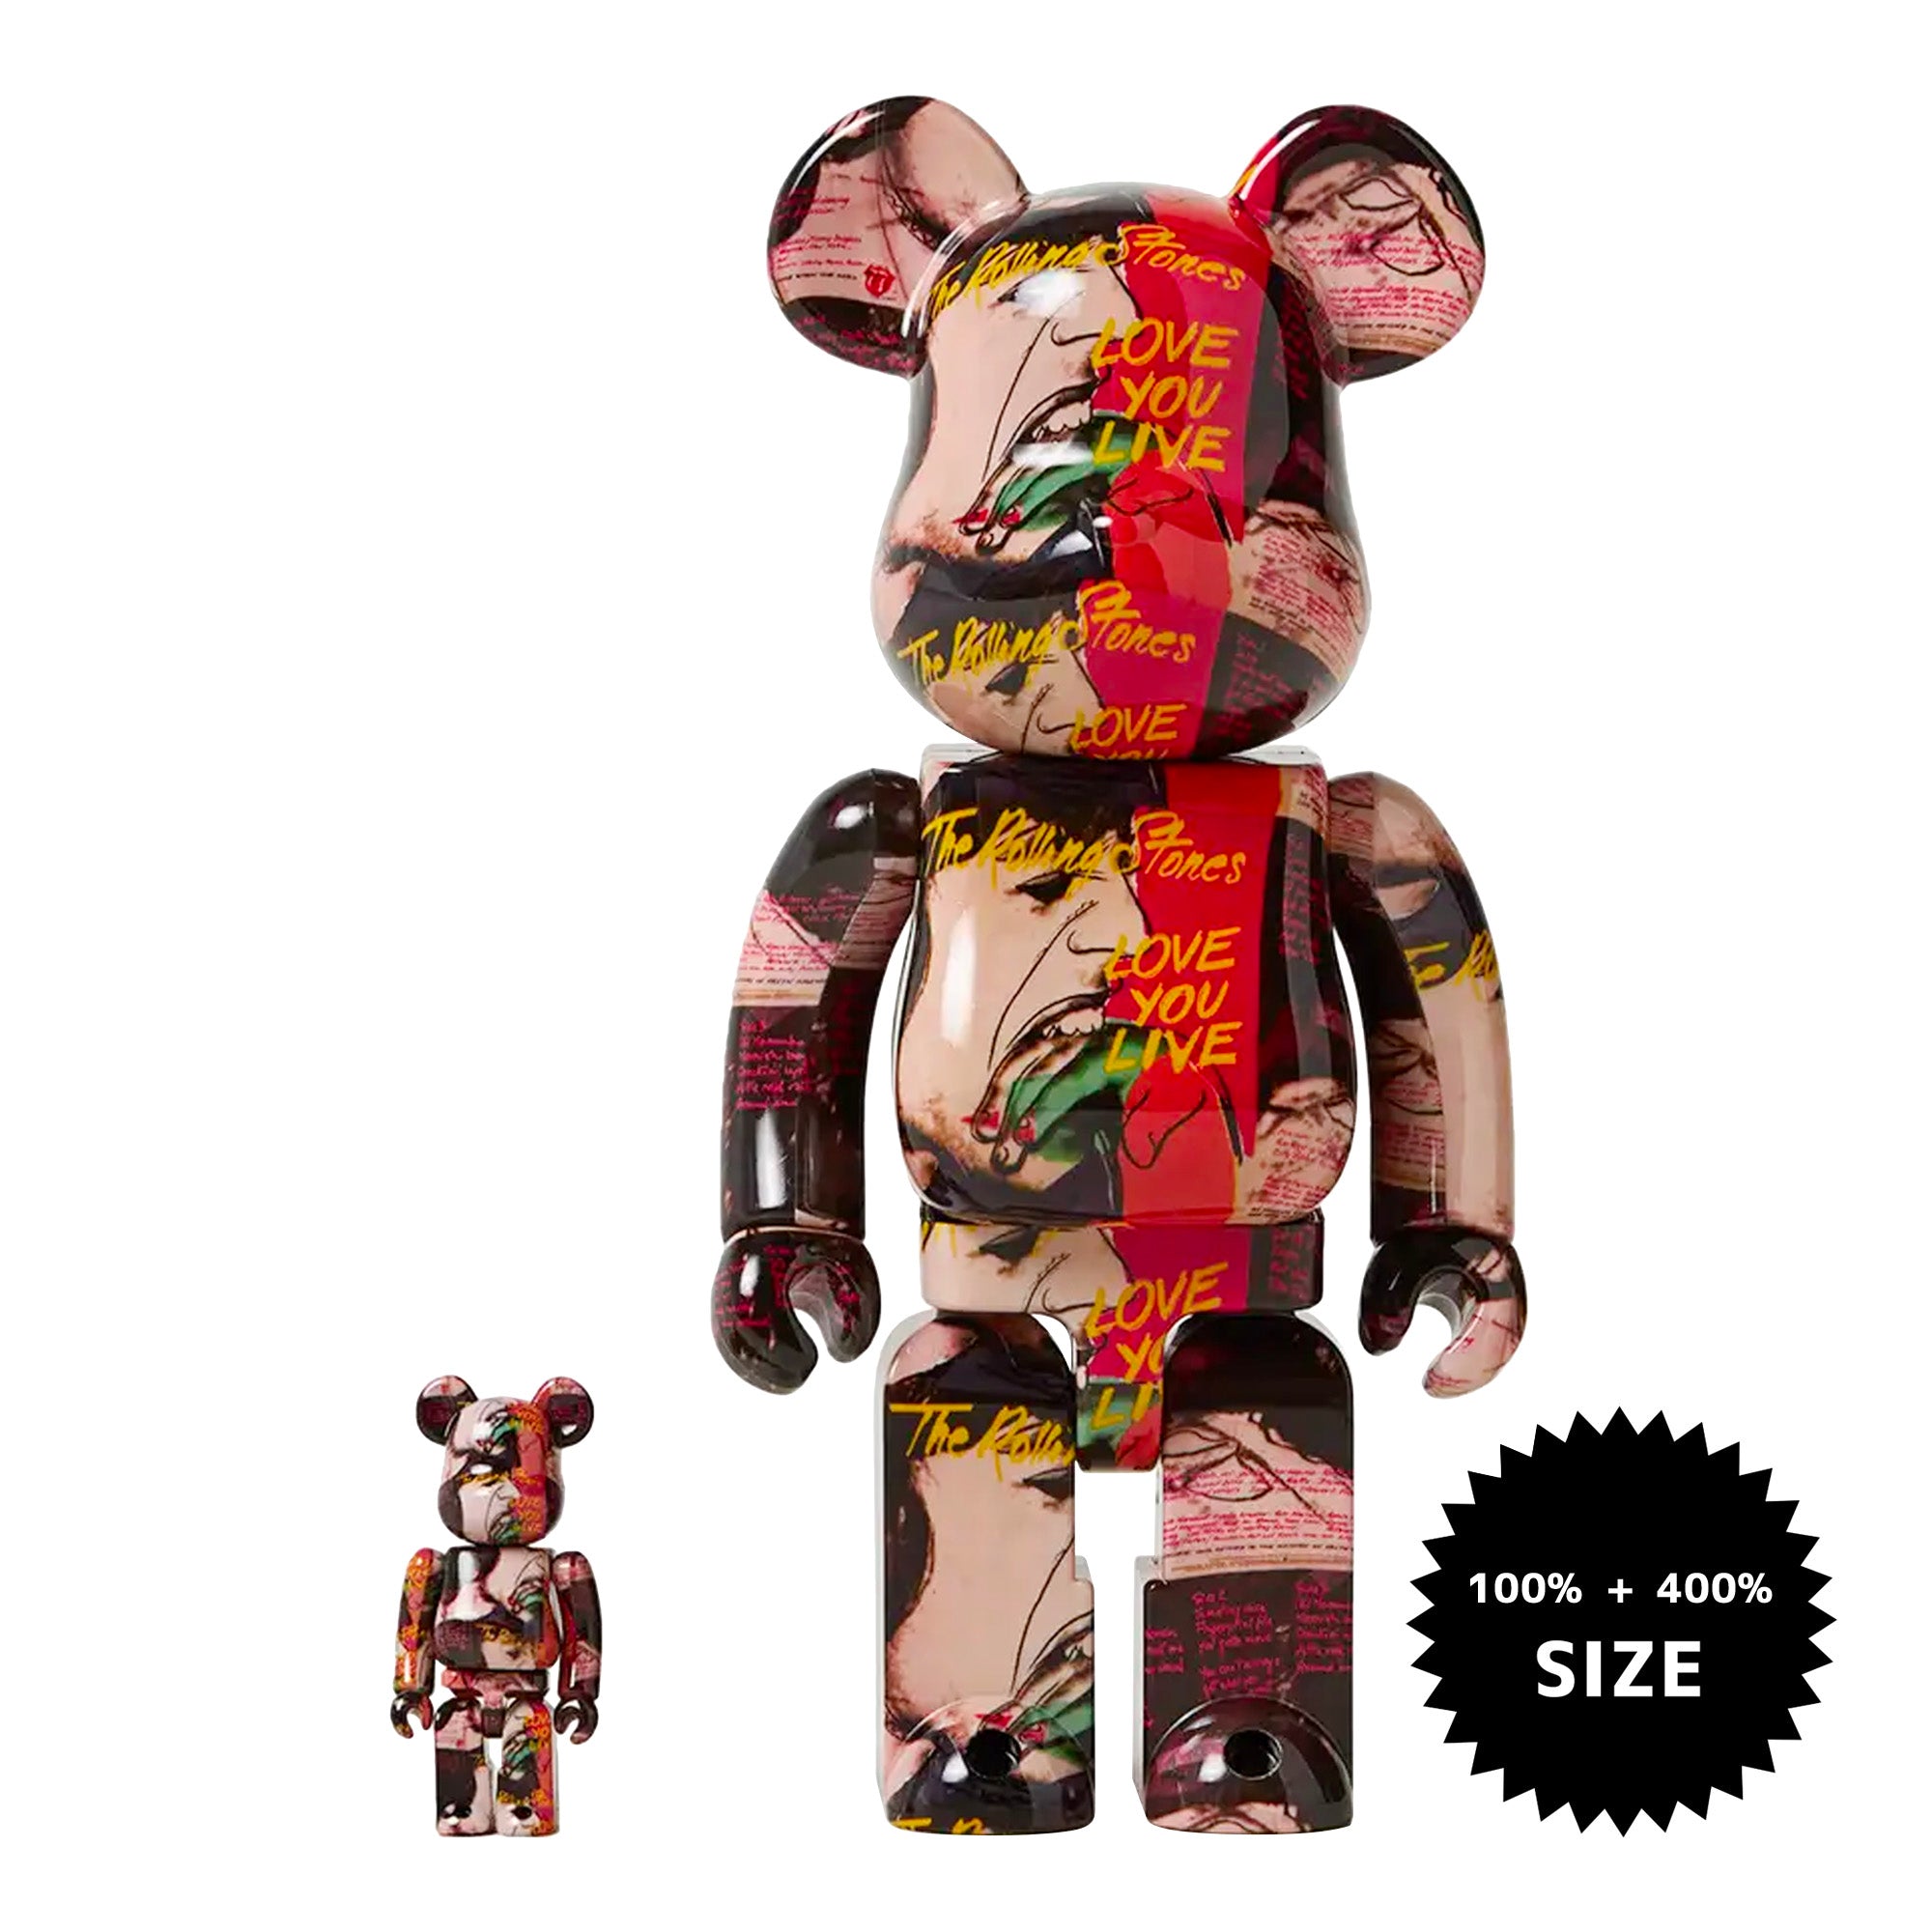 MEDICOM TOY: BE@RBRICK - Andy Warhol x The Rolling Stones 